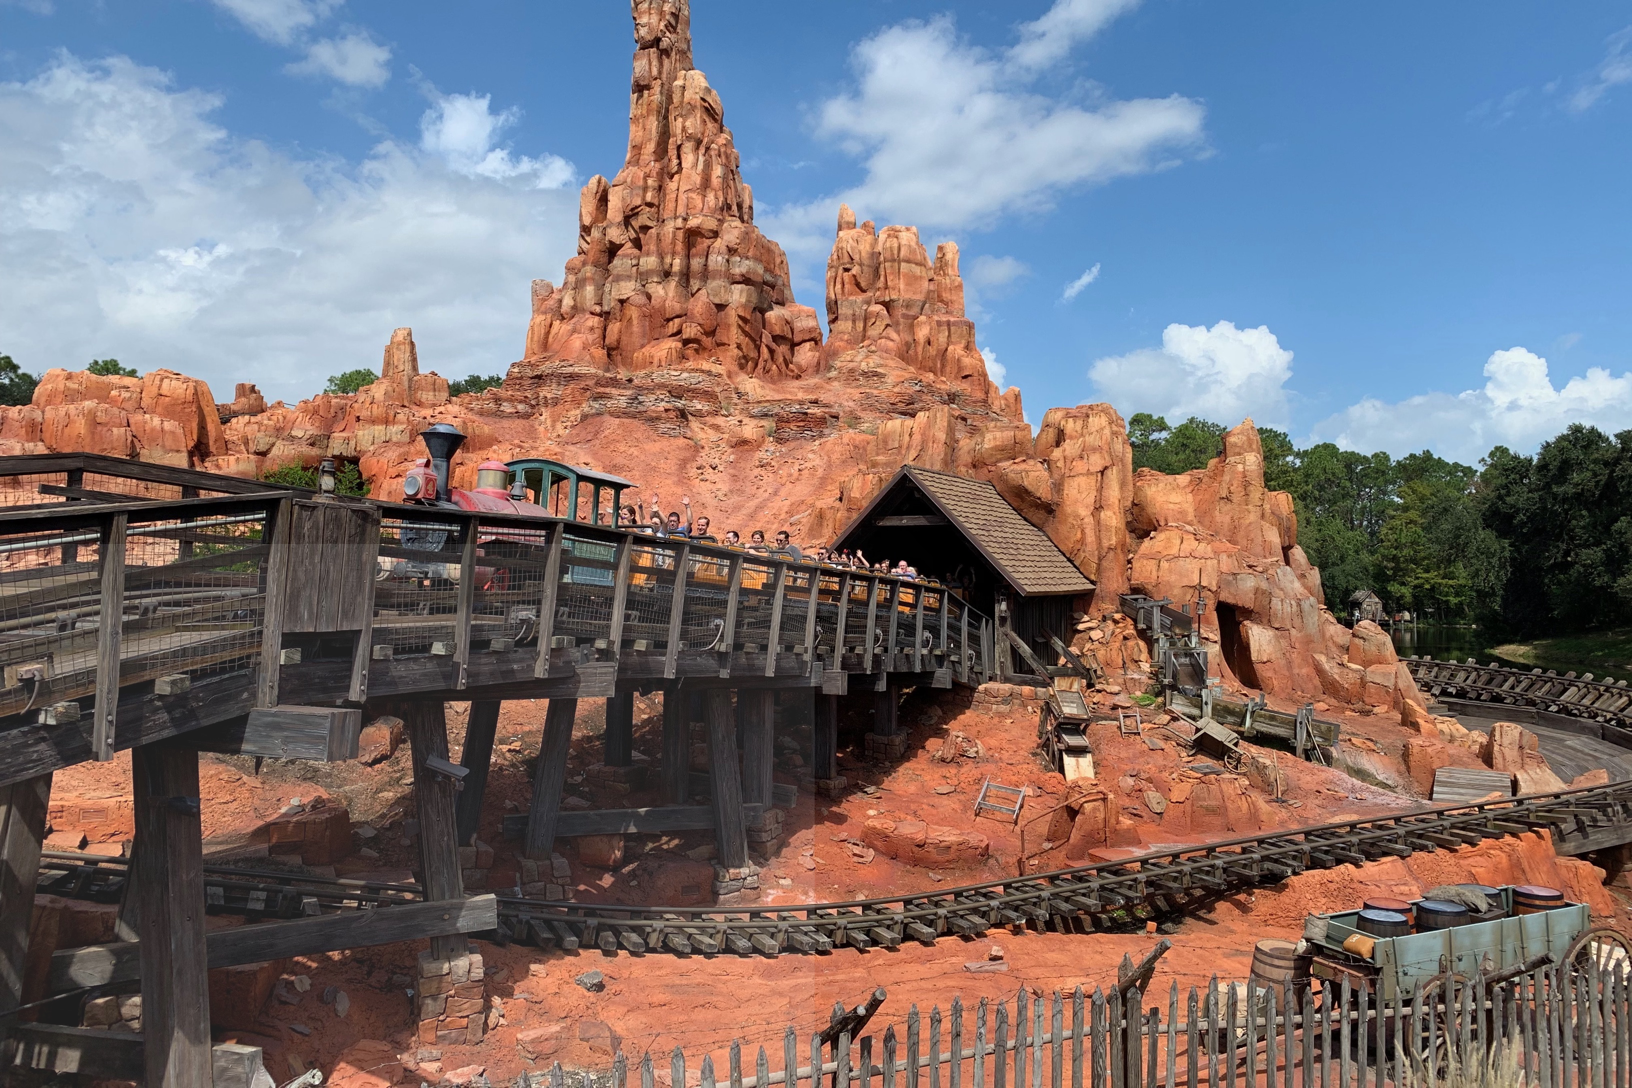 ground view of the train on the Big Thunder Mountain Railroad as it travels over the tracks